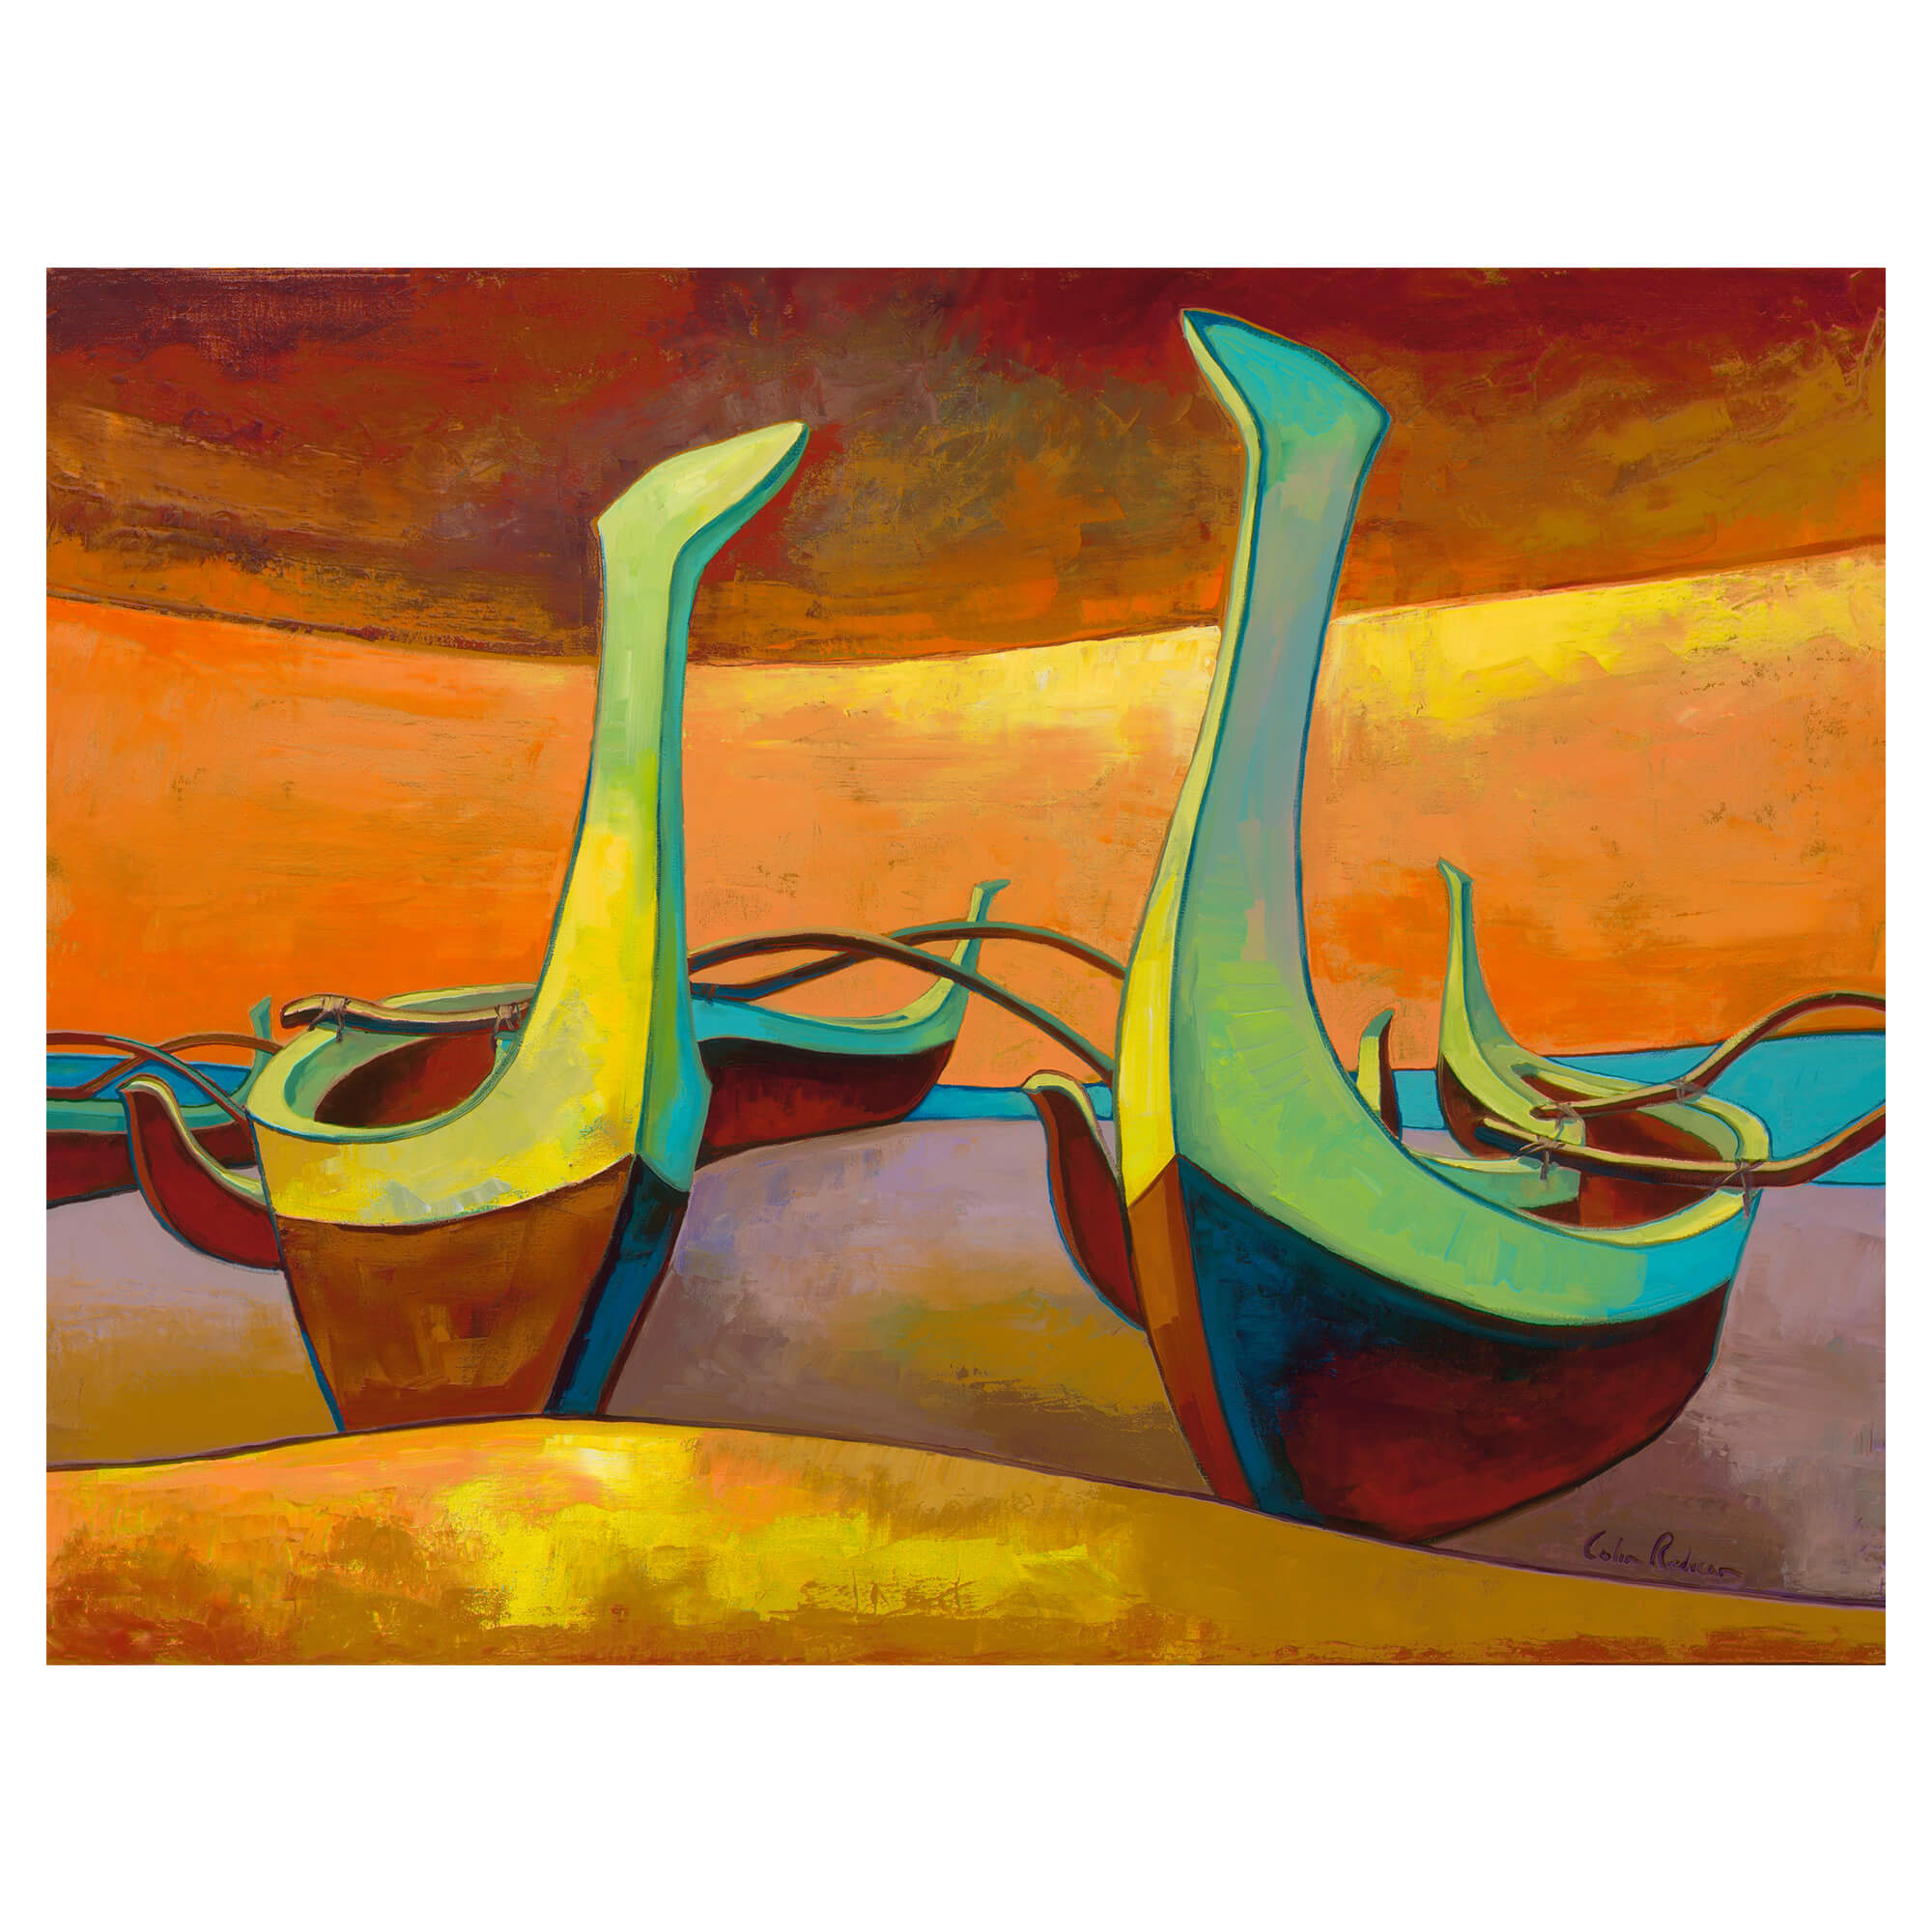 Two boats at the beach by Hawaii artist Colin Redican